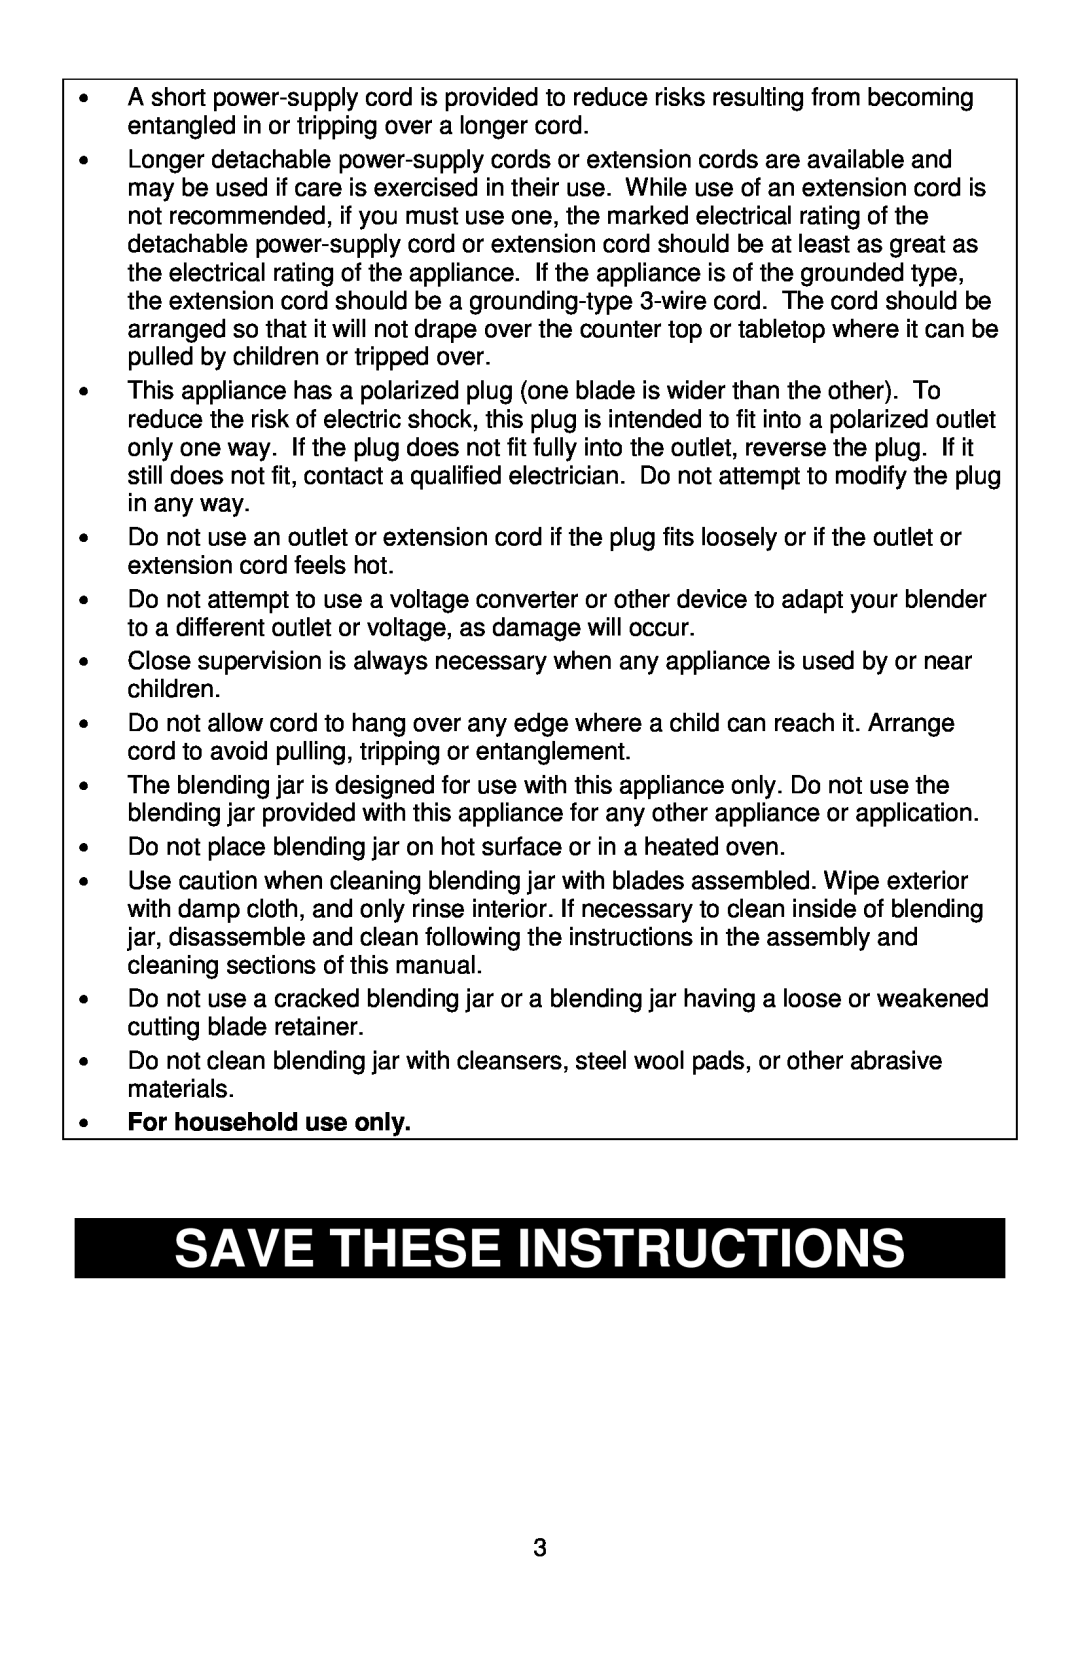 West Bend MCD 289 instruction manual Save These Instructions, For household use only 